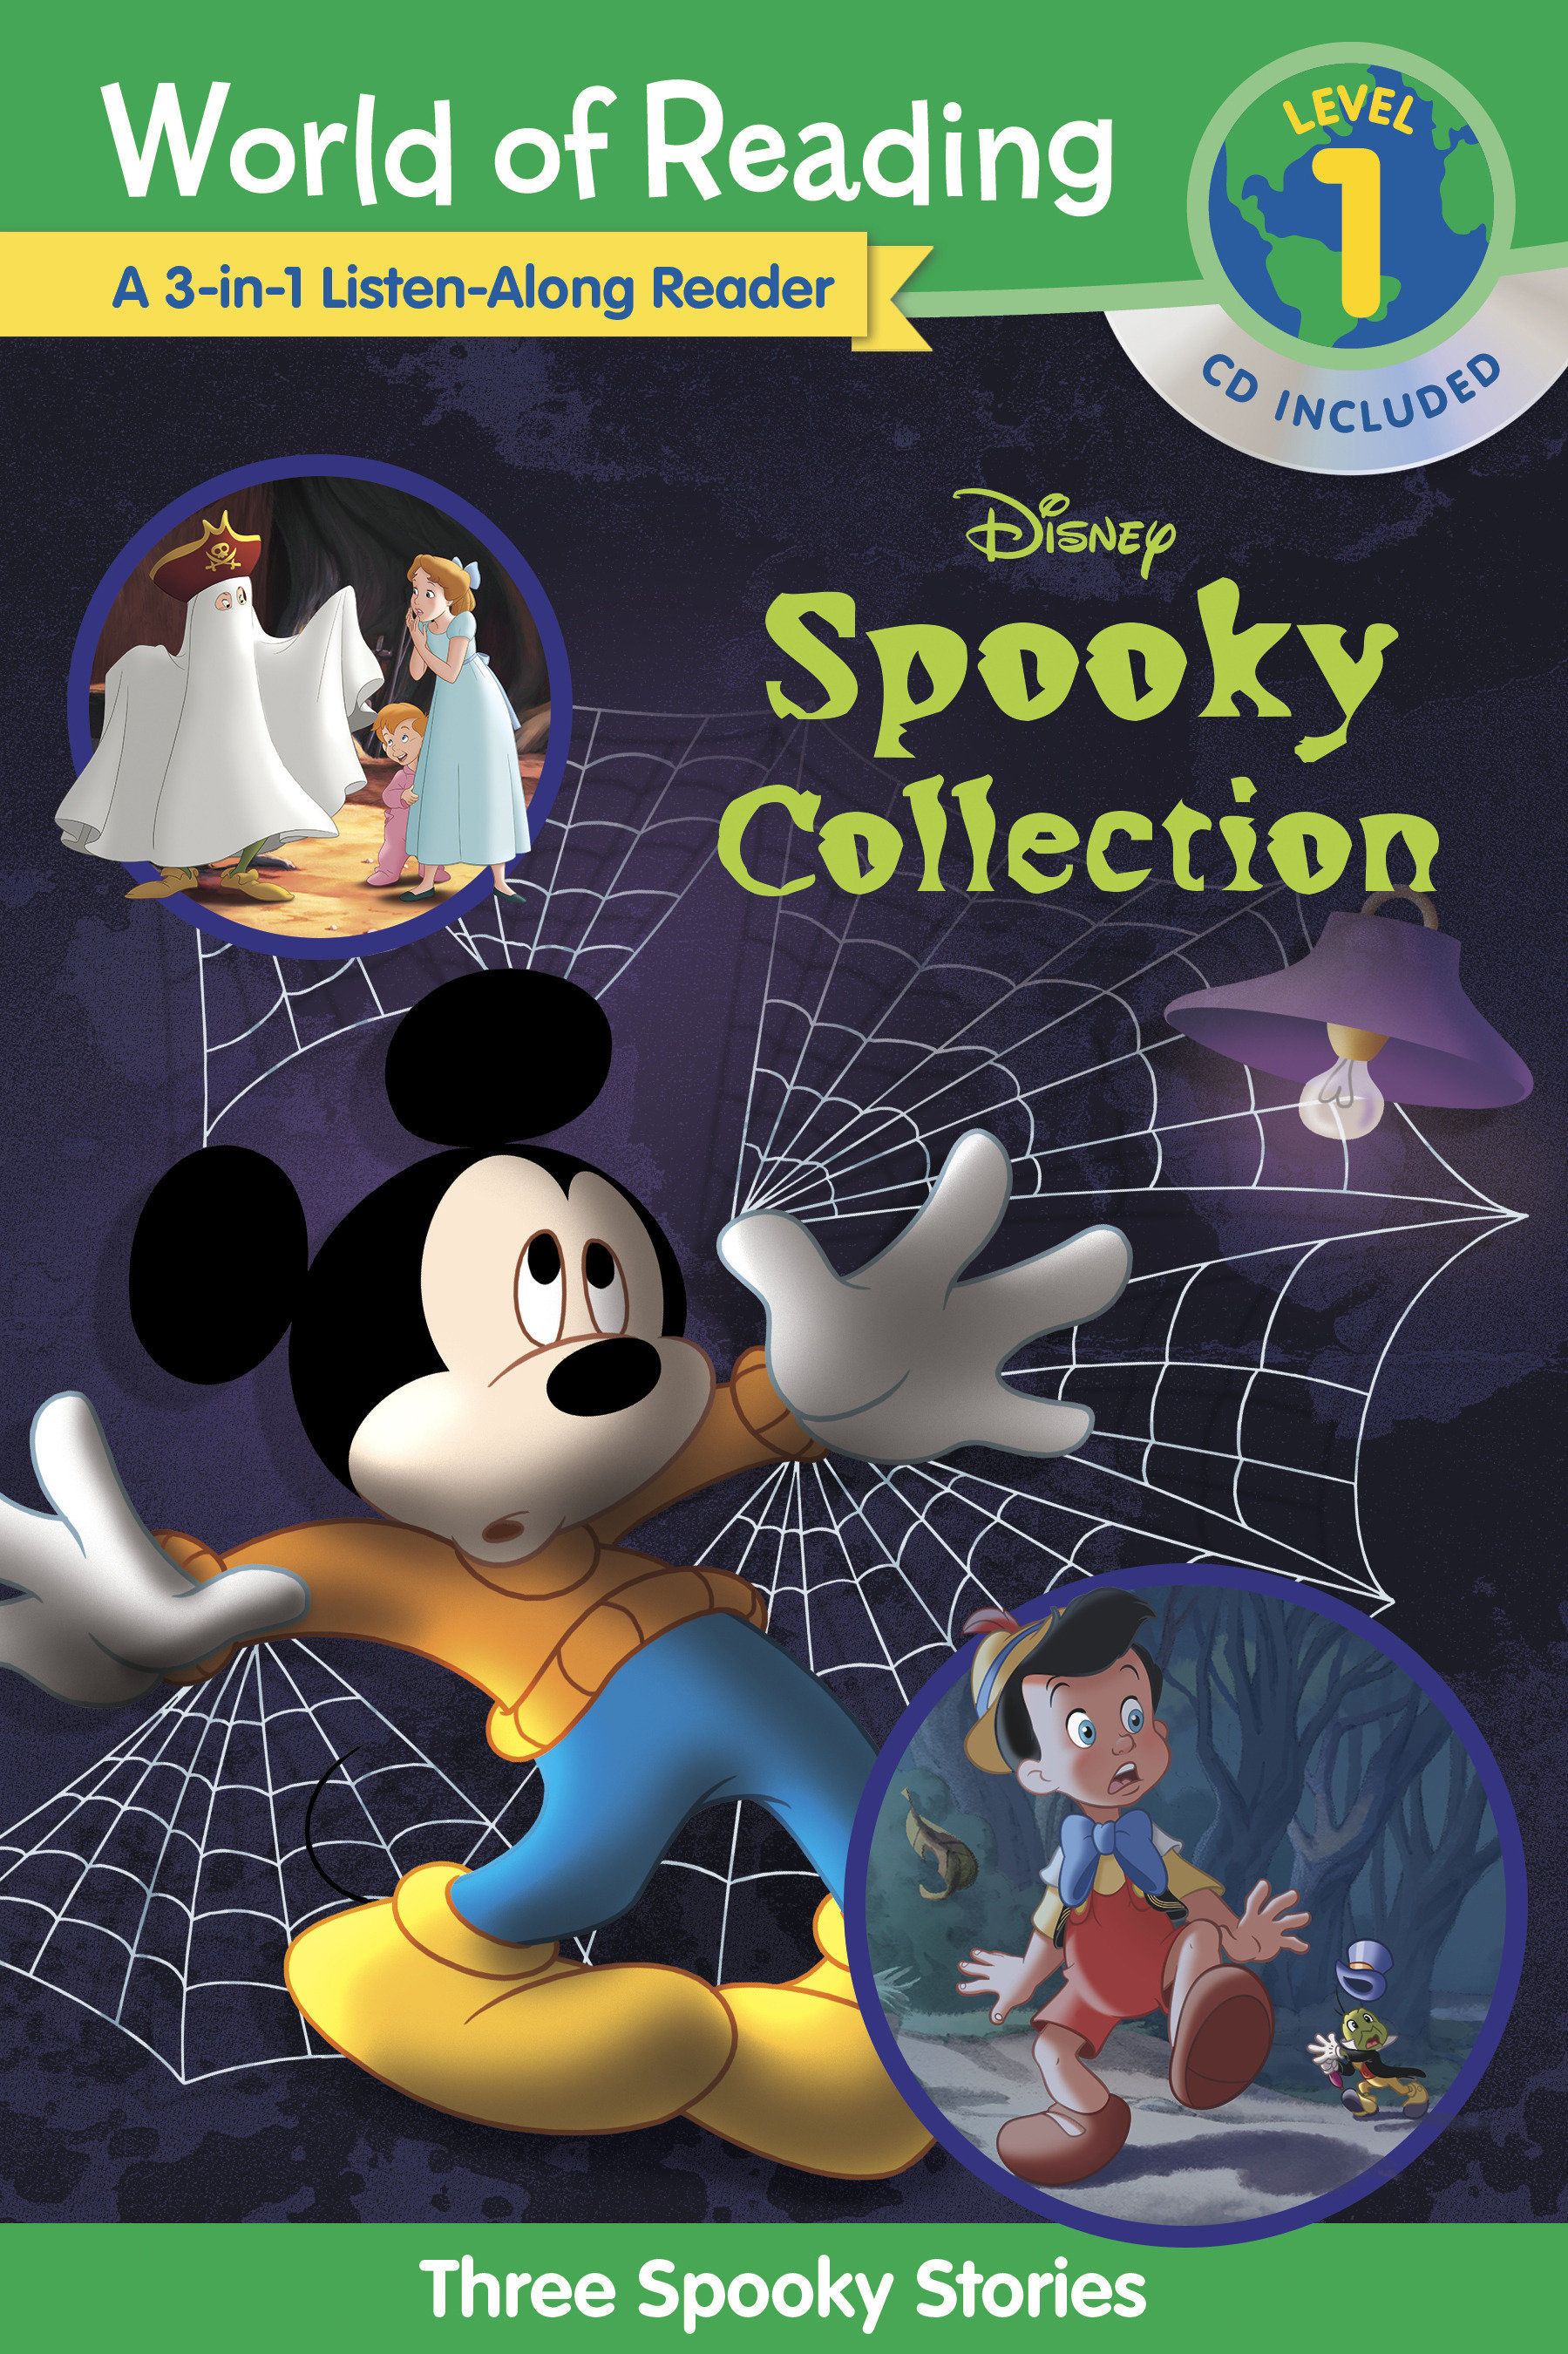 World of Reading Disney's Spooky Collection 3-In-1 Listen-Along Reader-Level 1 Reader